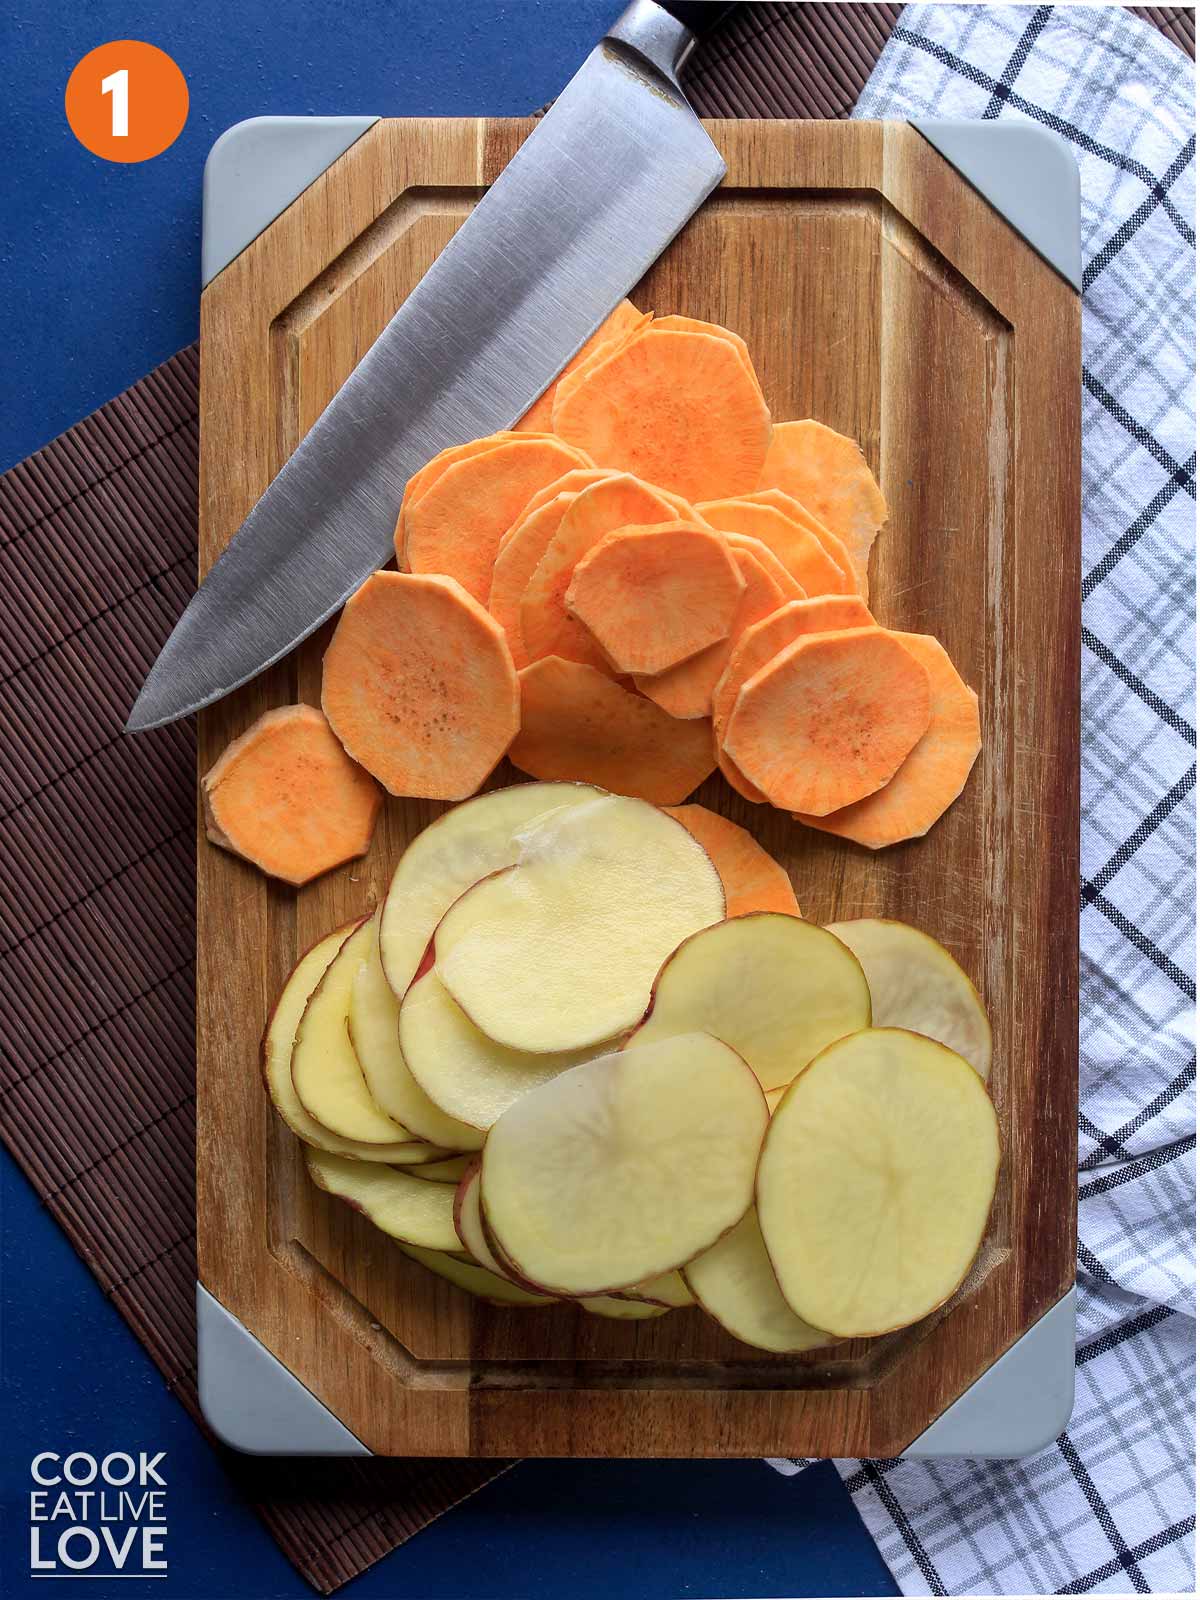 Sliced potatoes and sweet potatoes on a cutting board.